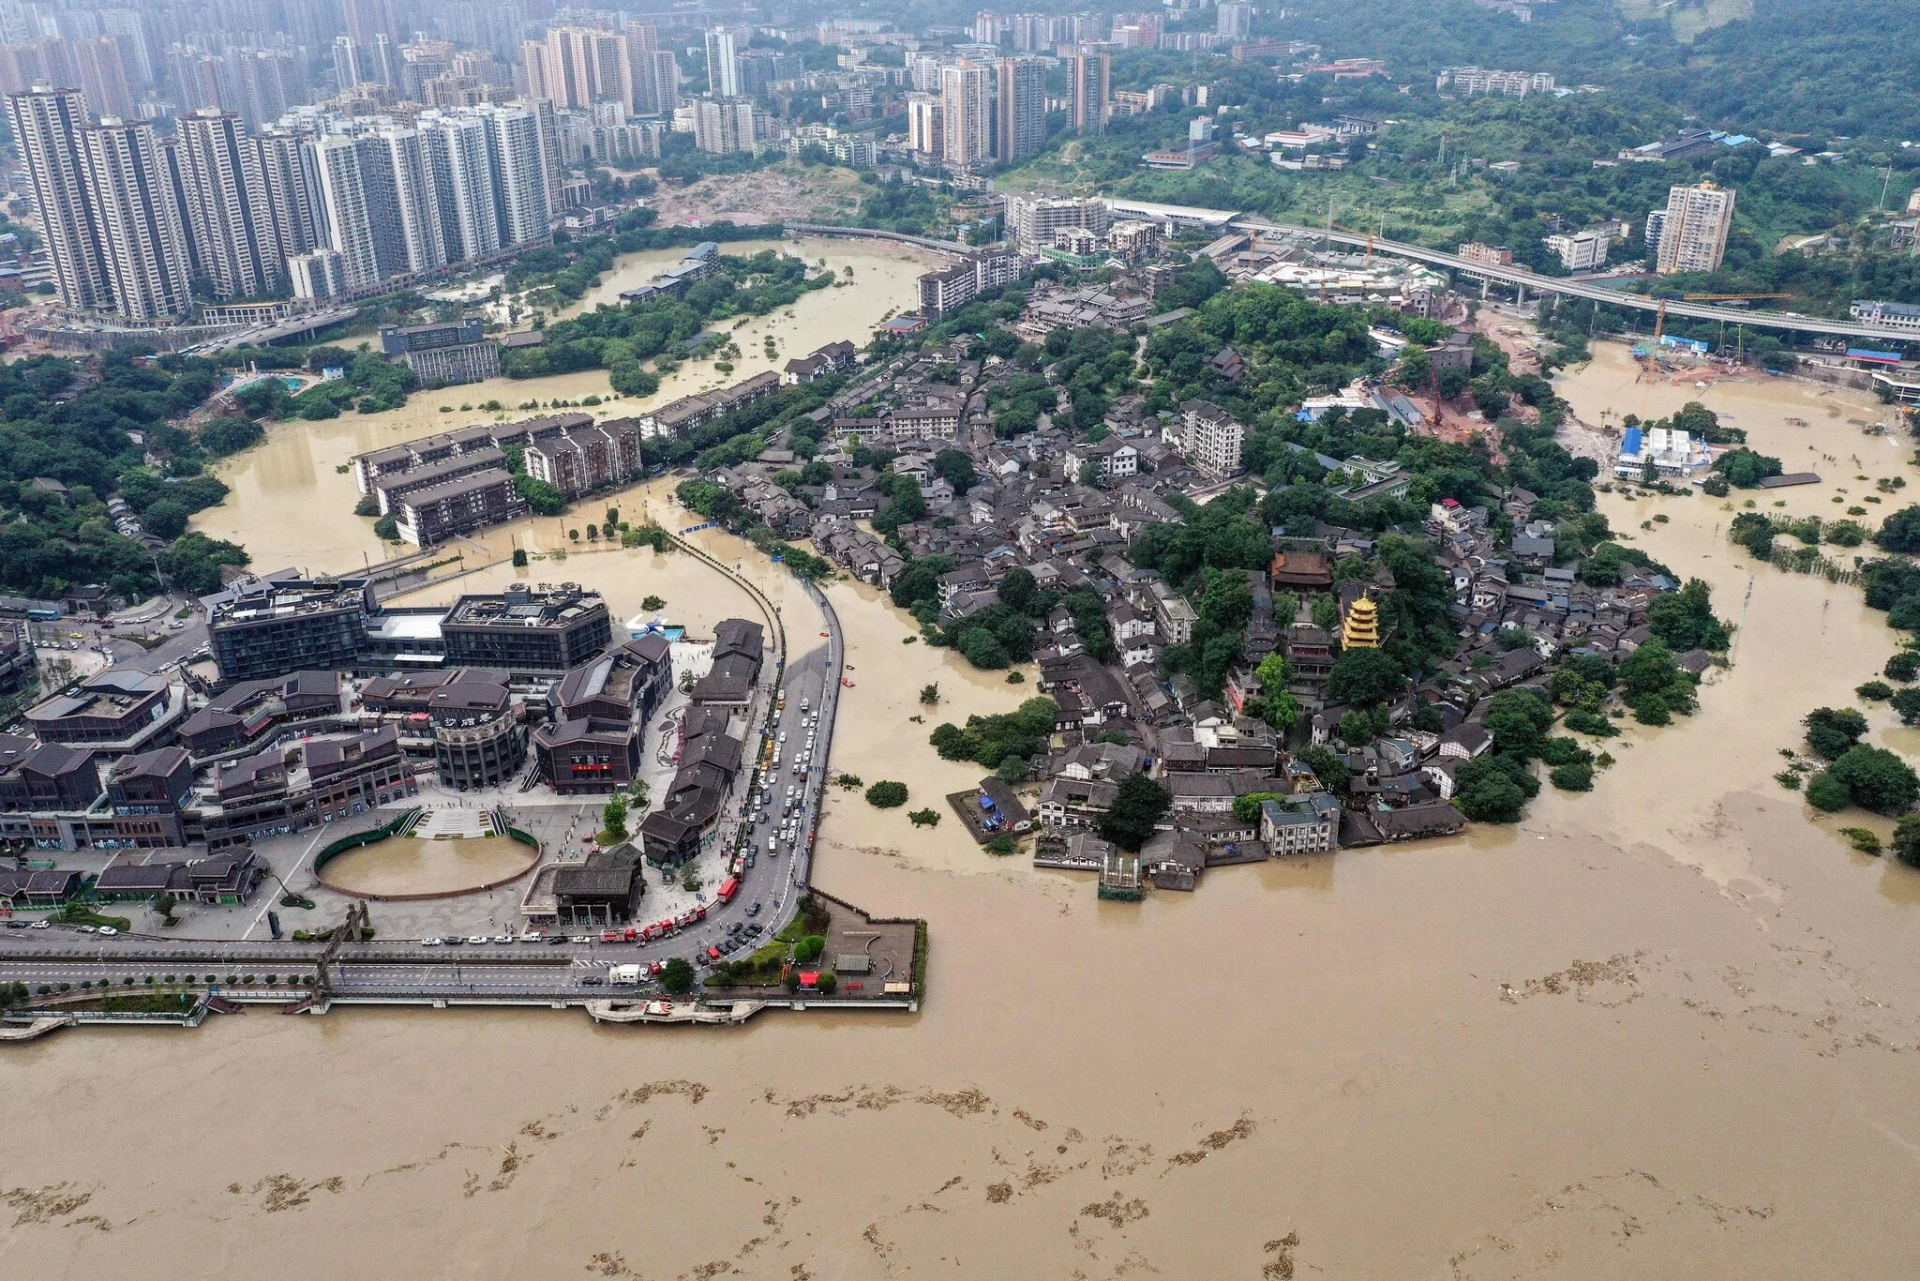 Floods in China kill hundreds, displace millions